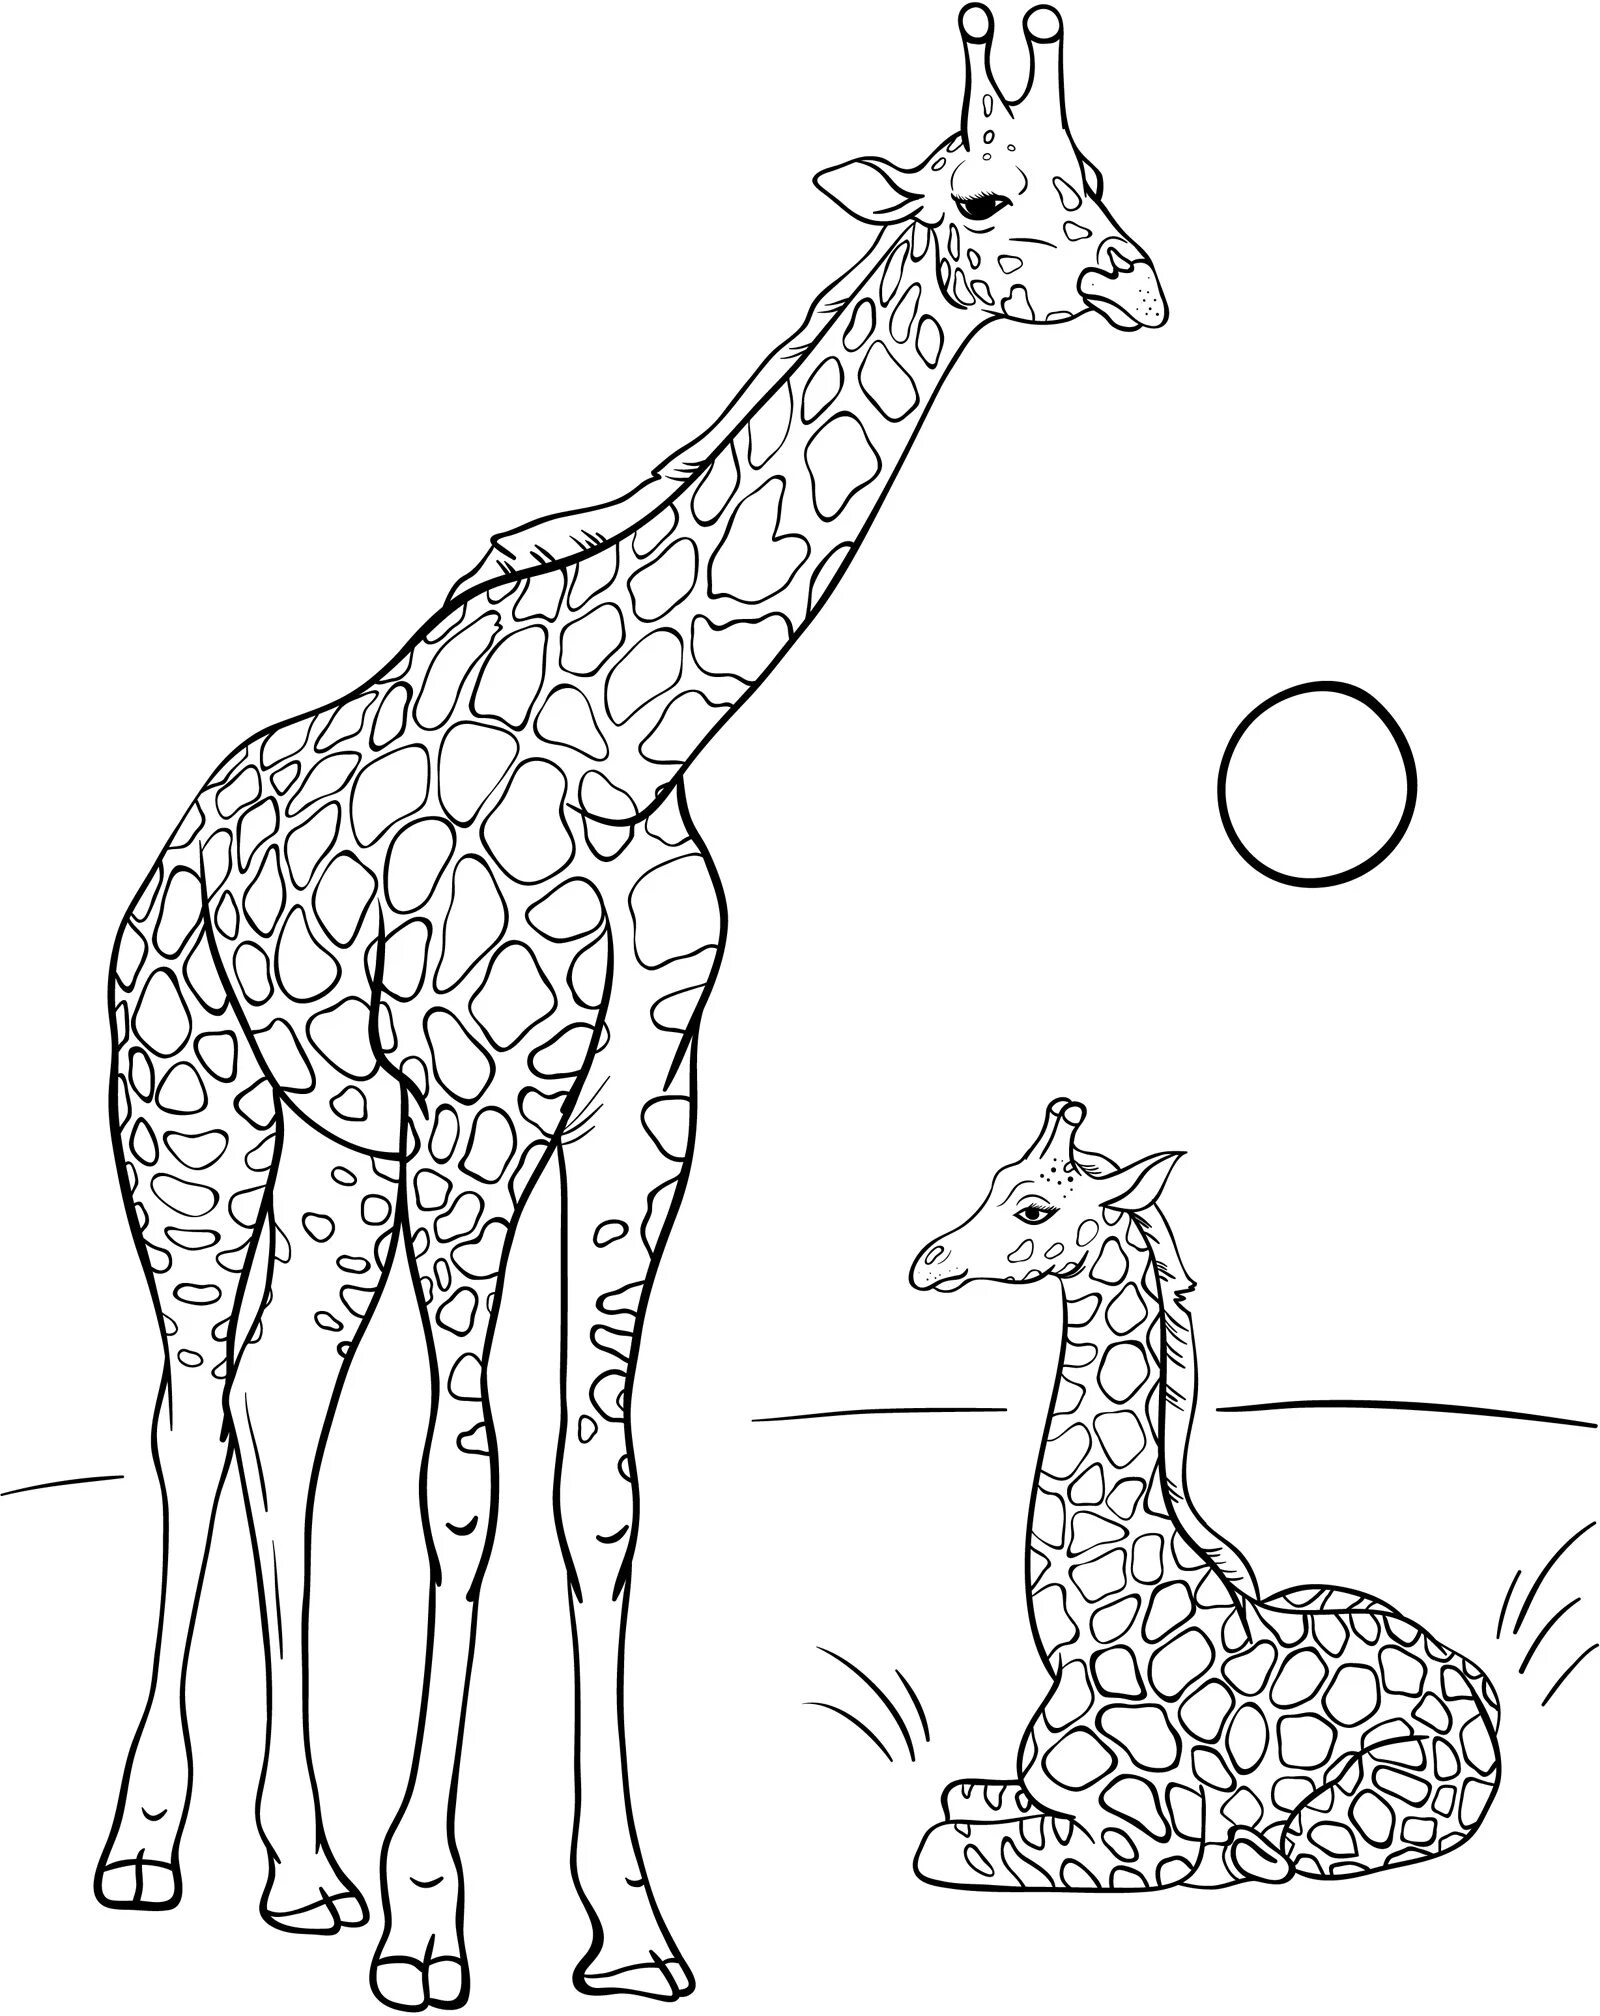 Coloring giraffe during the game